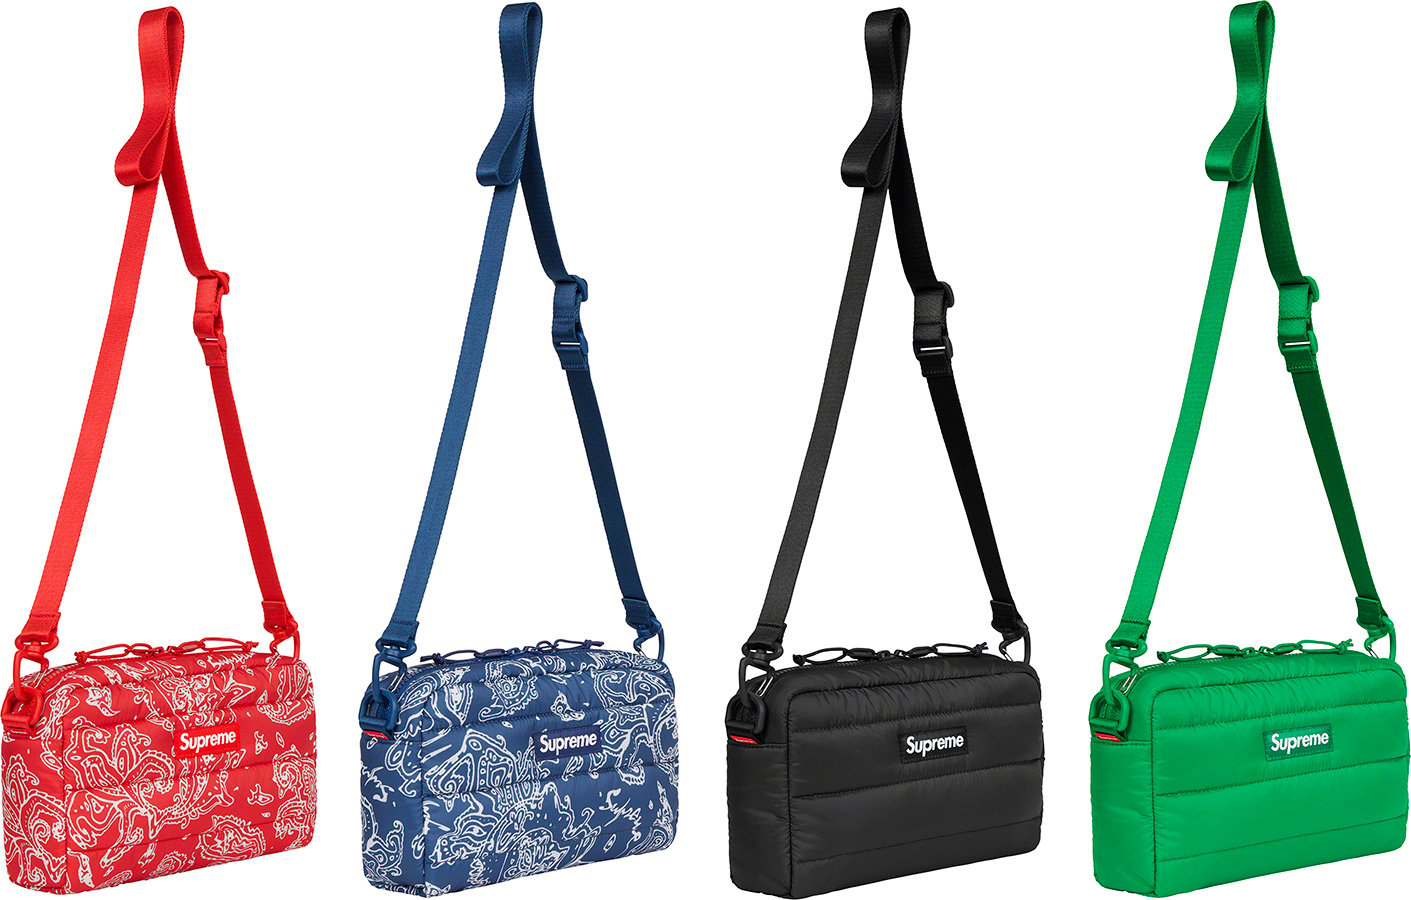 bags by supreme, Bags